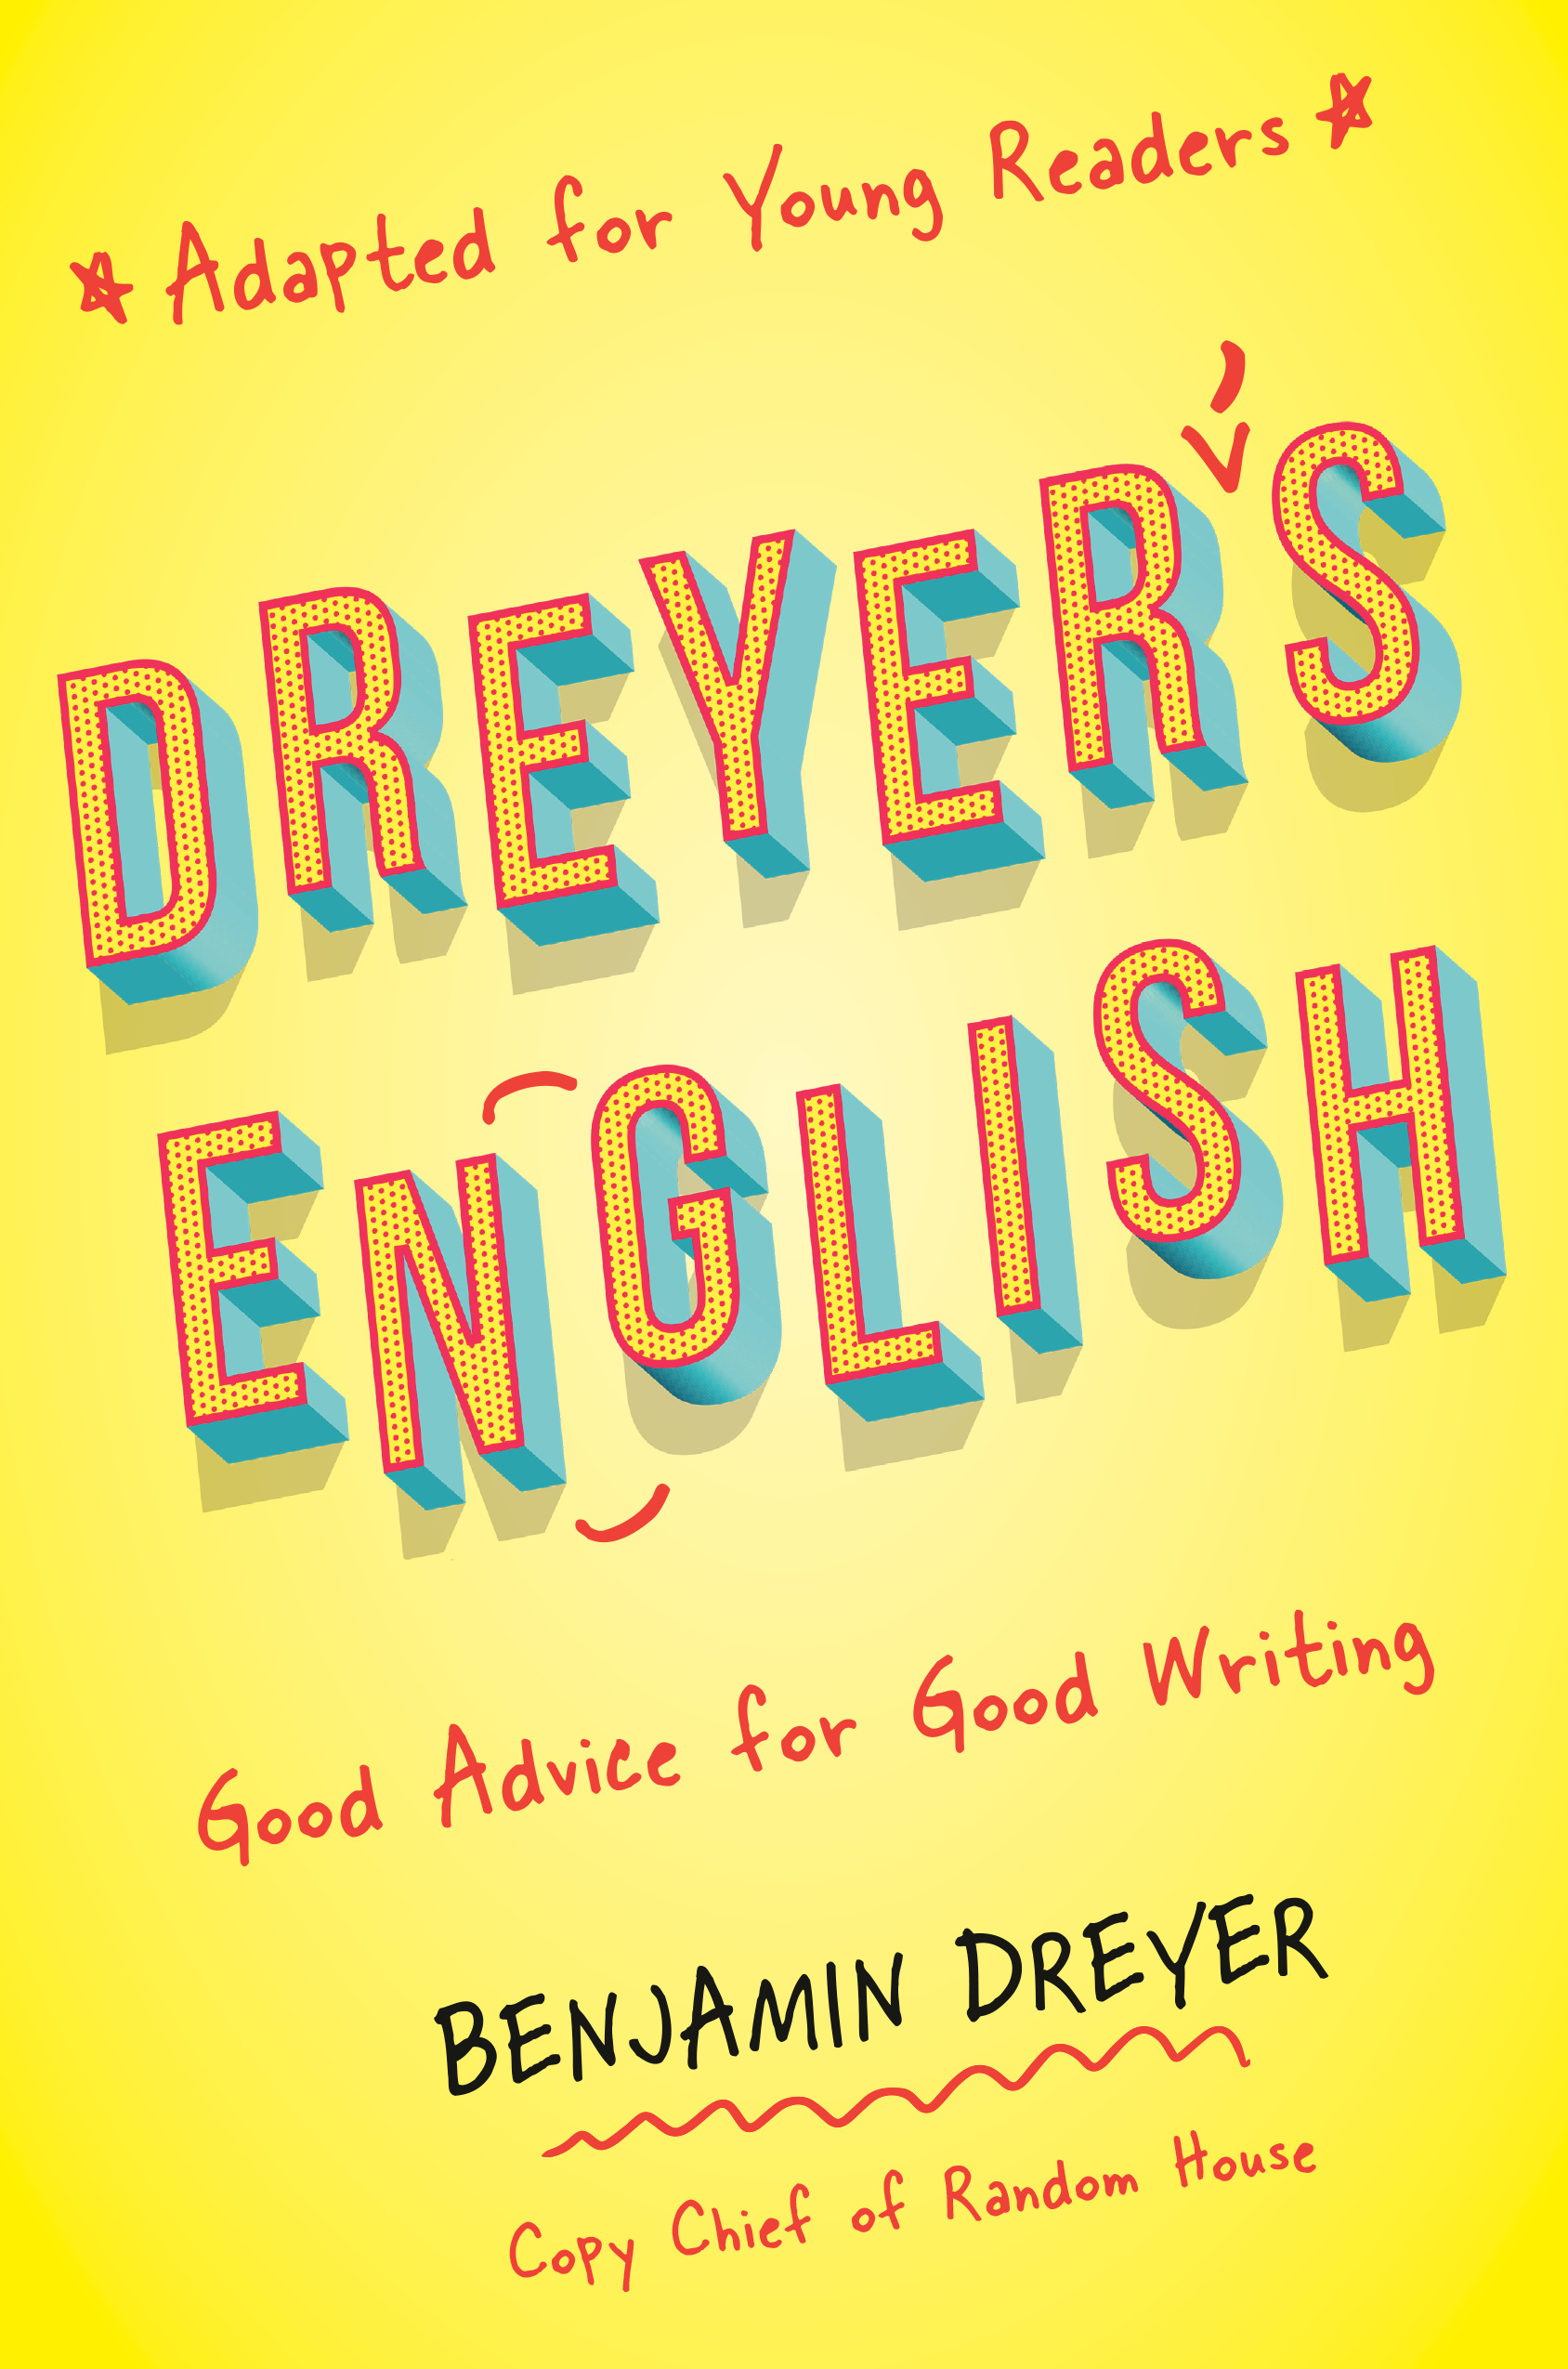 Dreyer's English (Adapted for Young Readers) : Good Advice for Good Writing | Dreyer, Benjamin